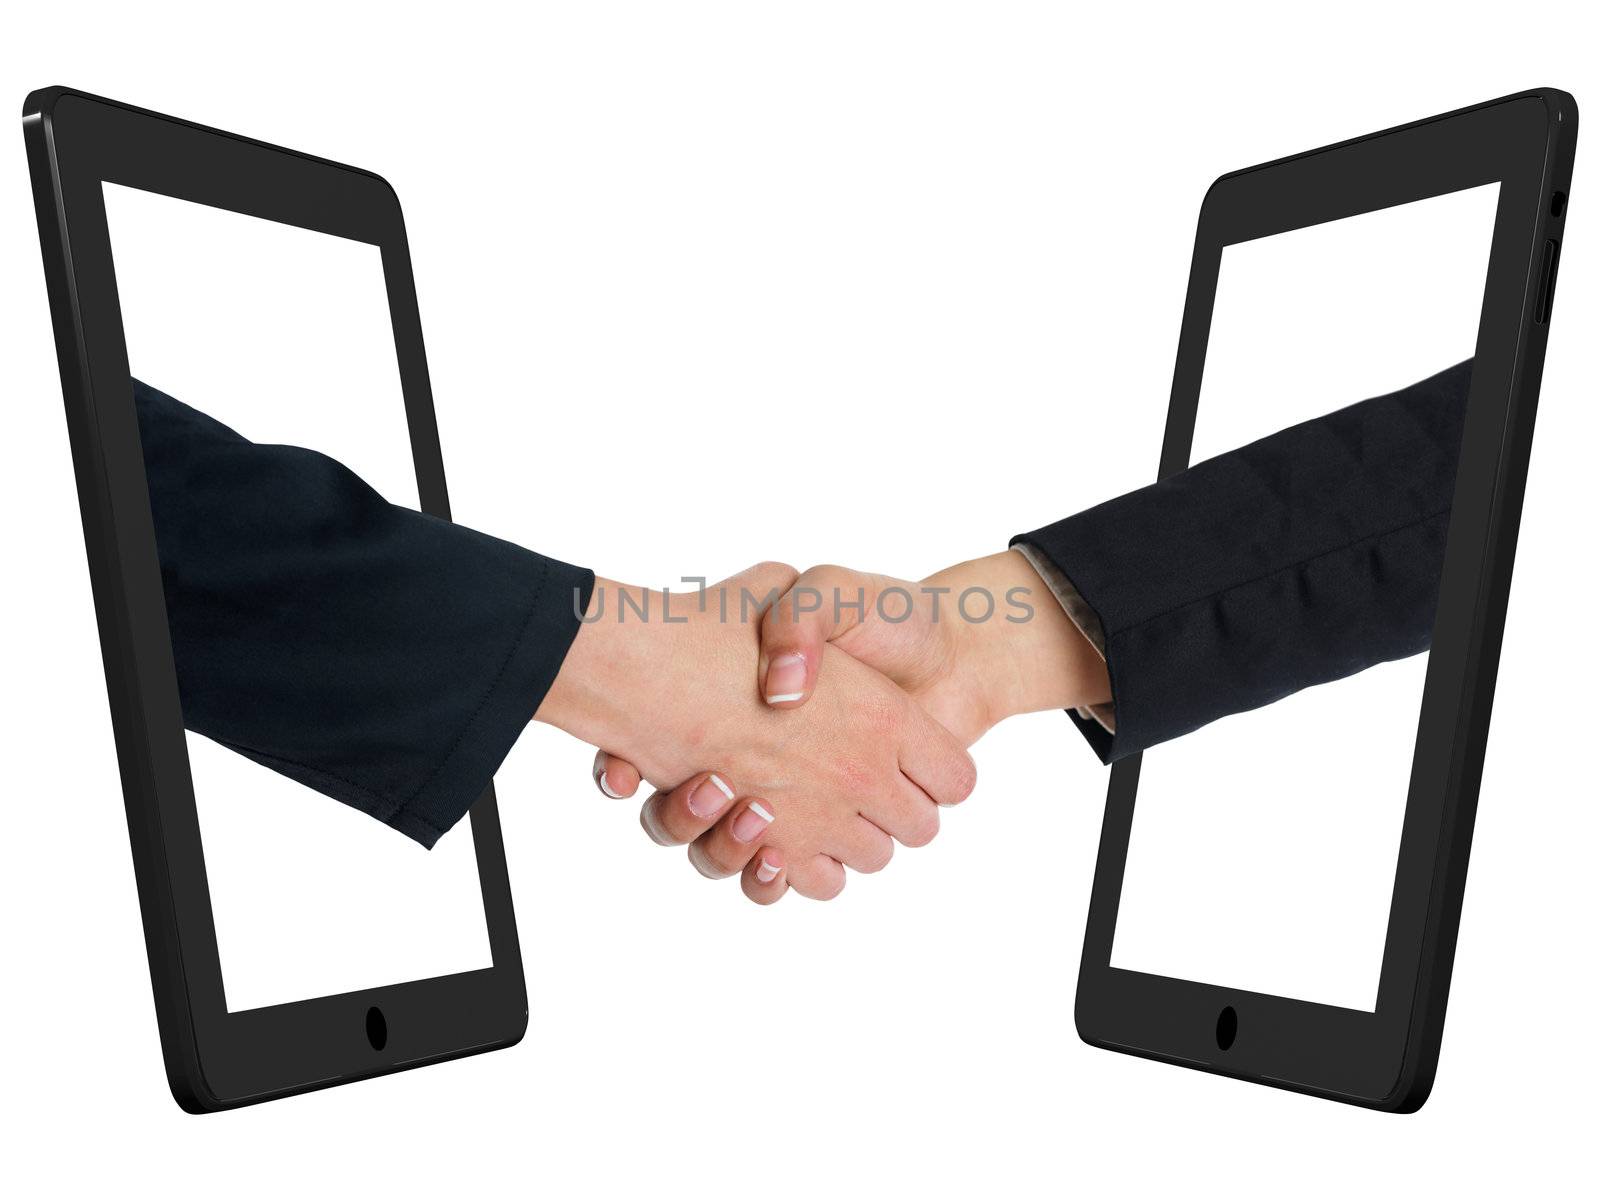 Two Computer Device and Hands in handshaking, Incernet Working Concept, Wireless Communication